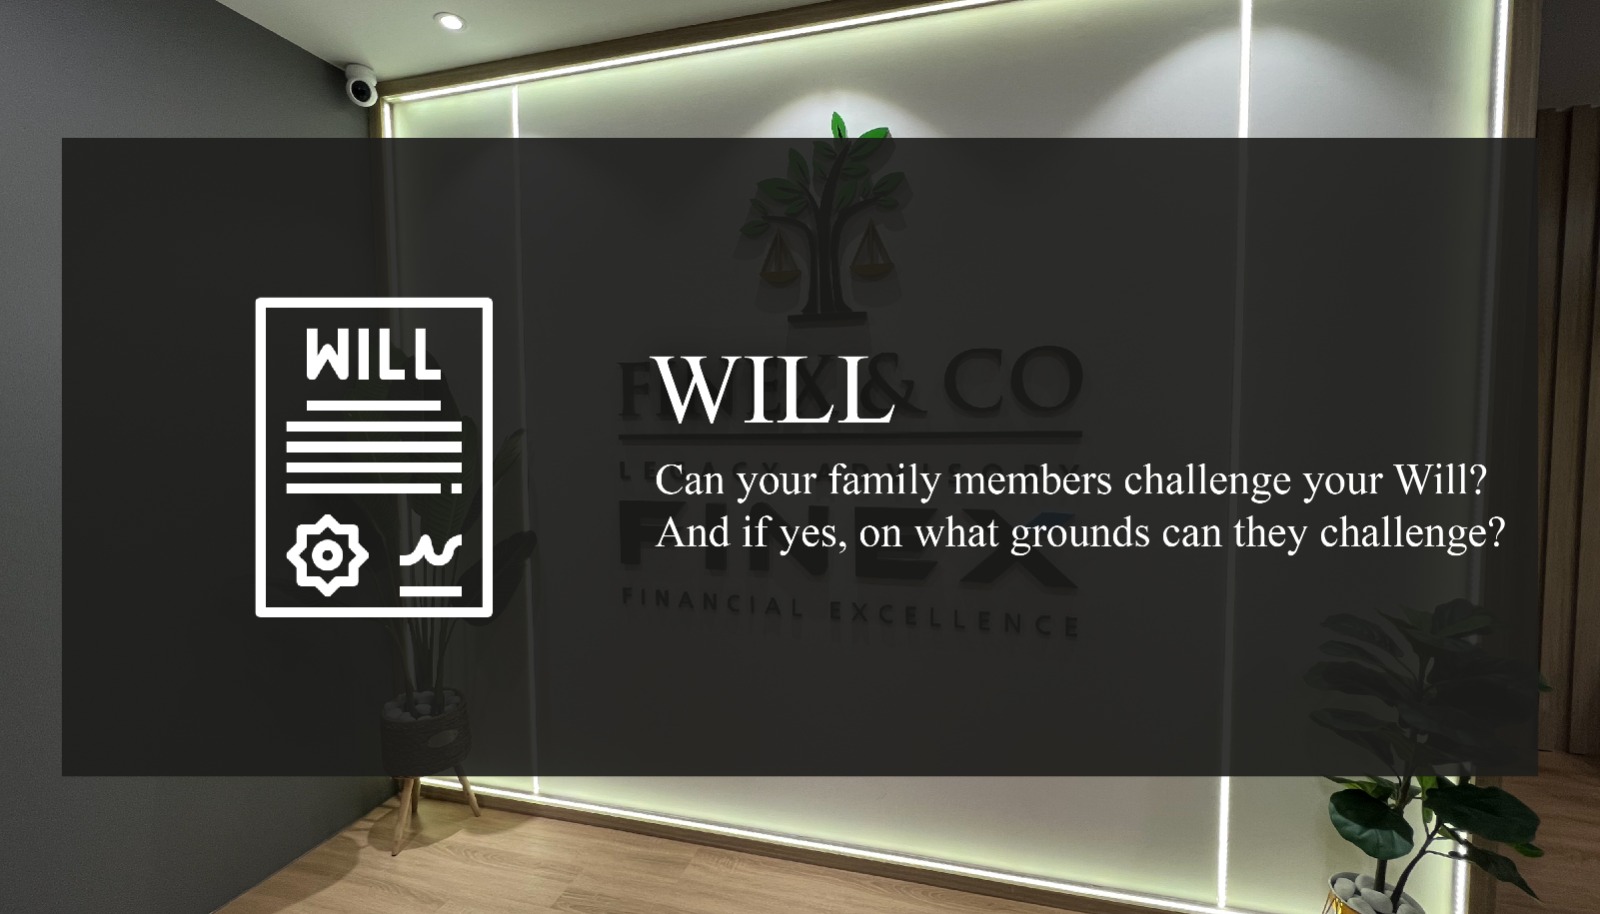 Can your family members challenge your Will? And if yes, on what grounds can they challenge?